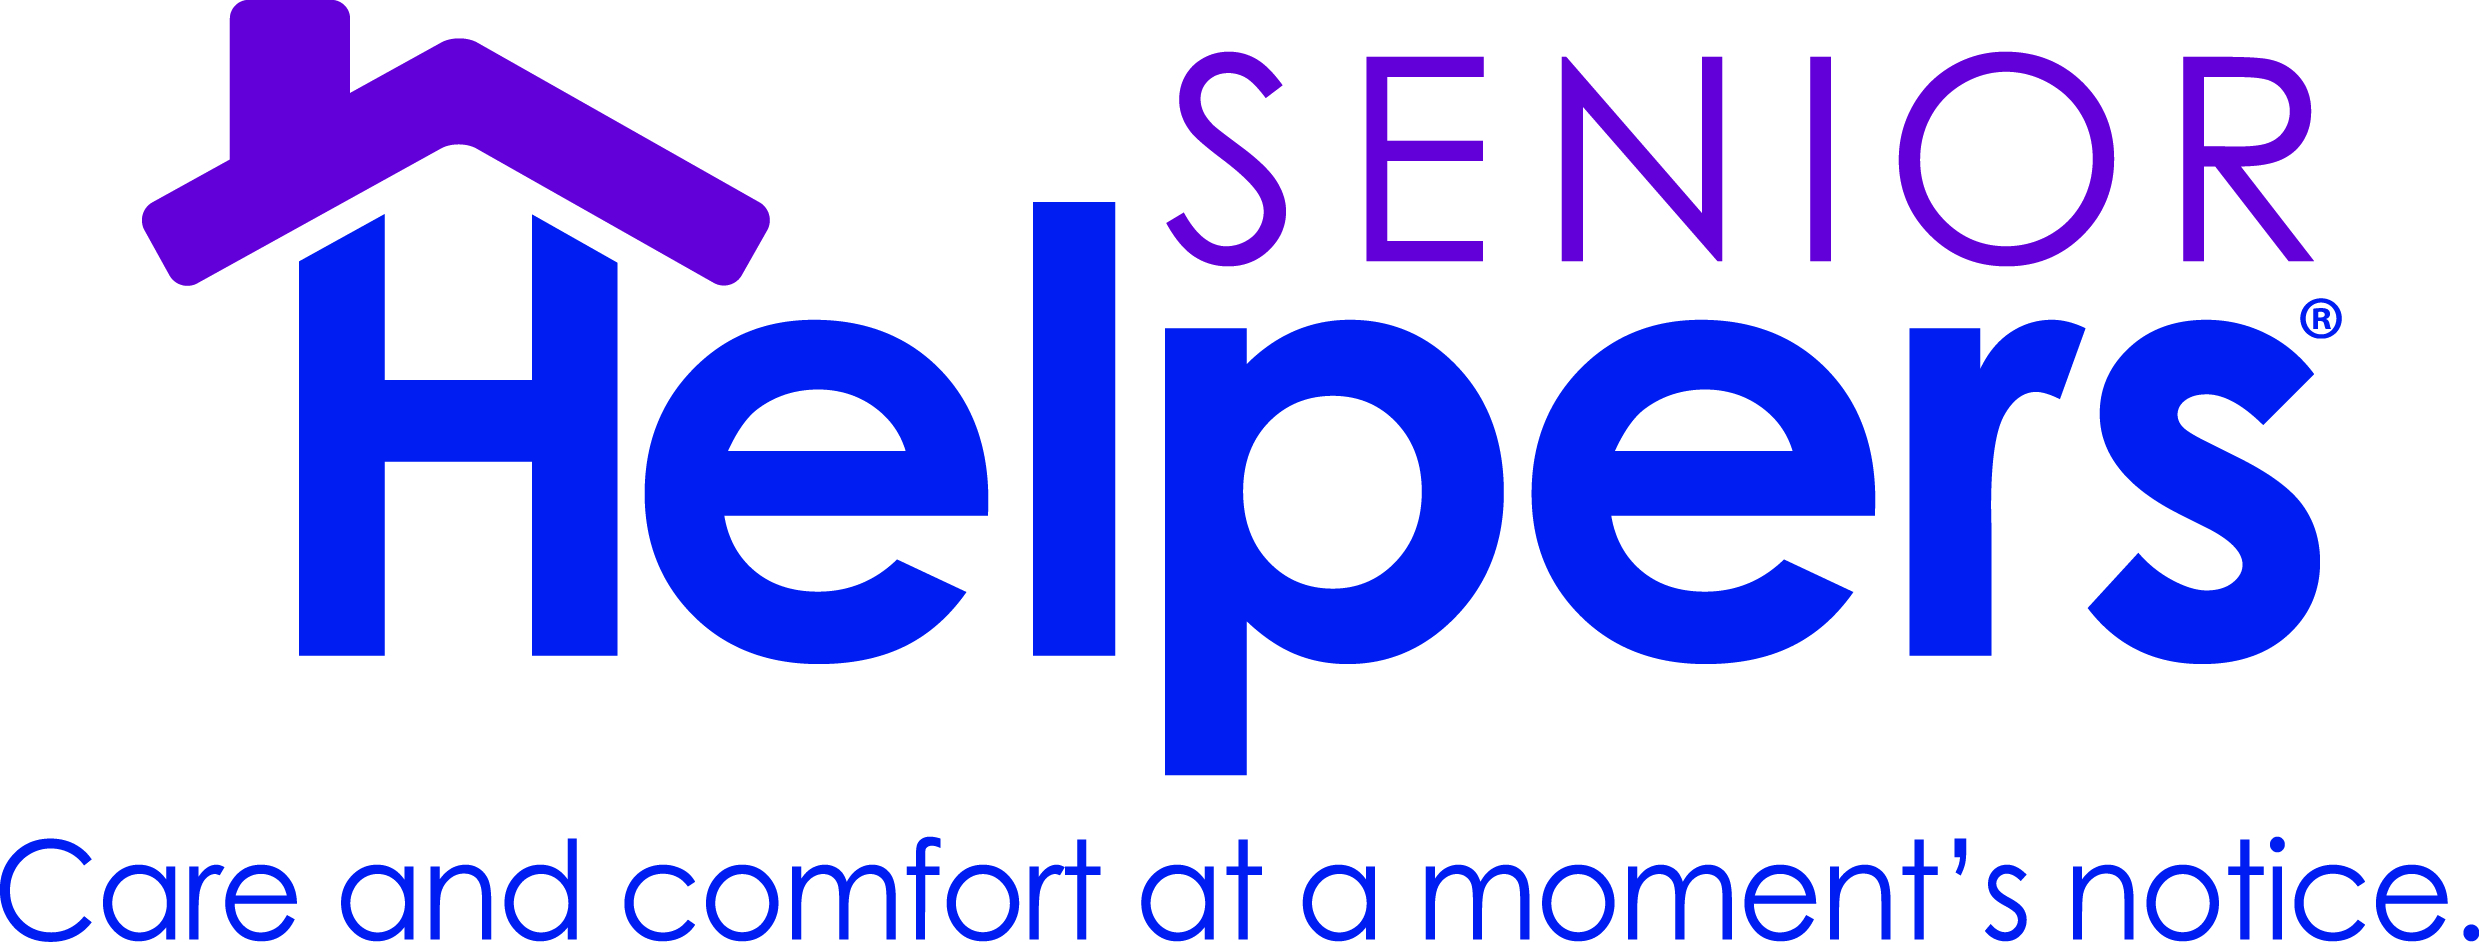 Senior Helpers is one the nation's largest in-home senior care companies.